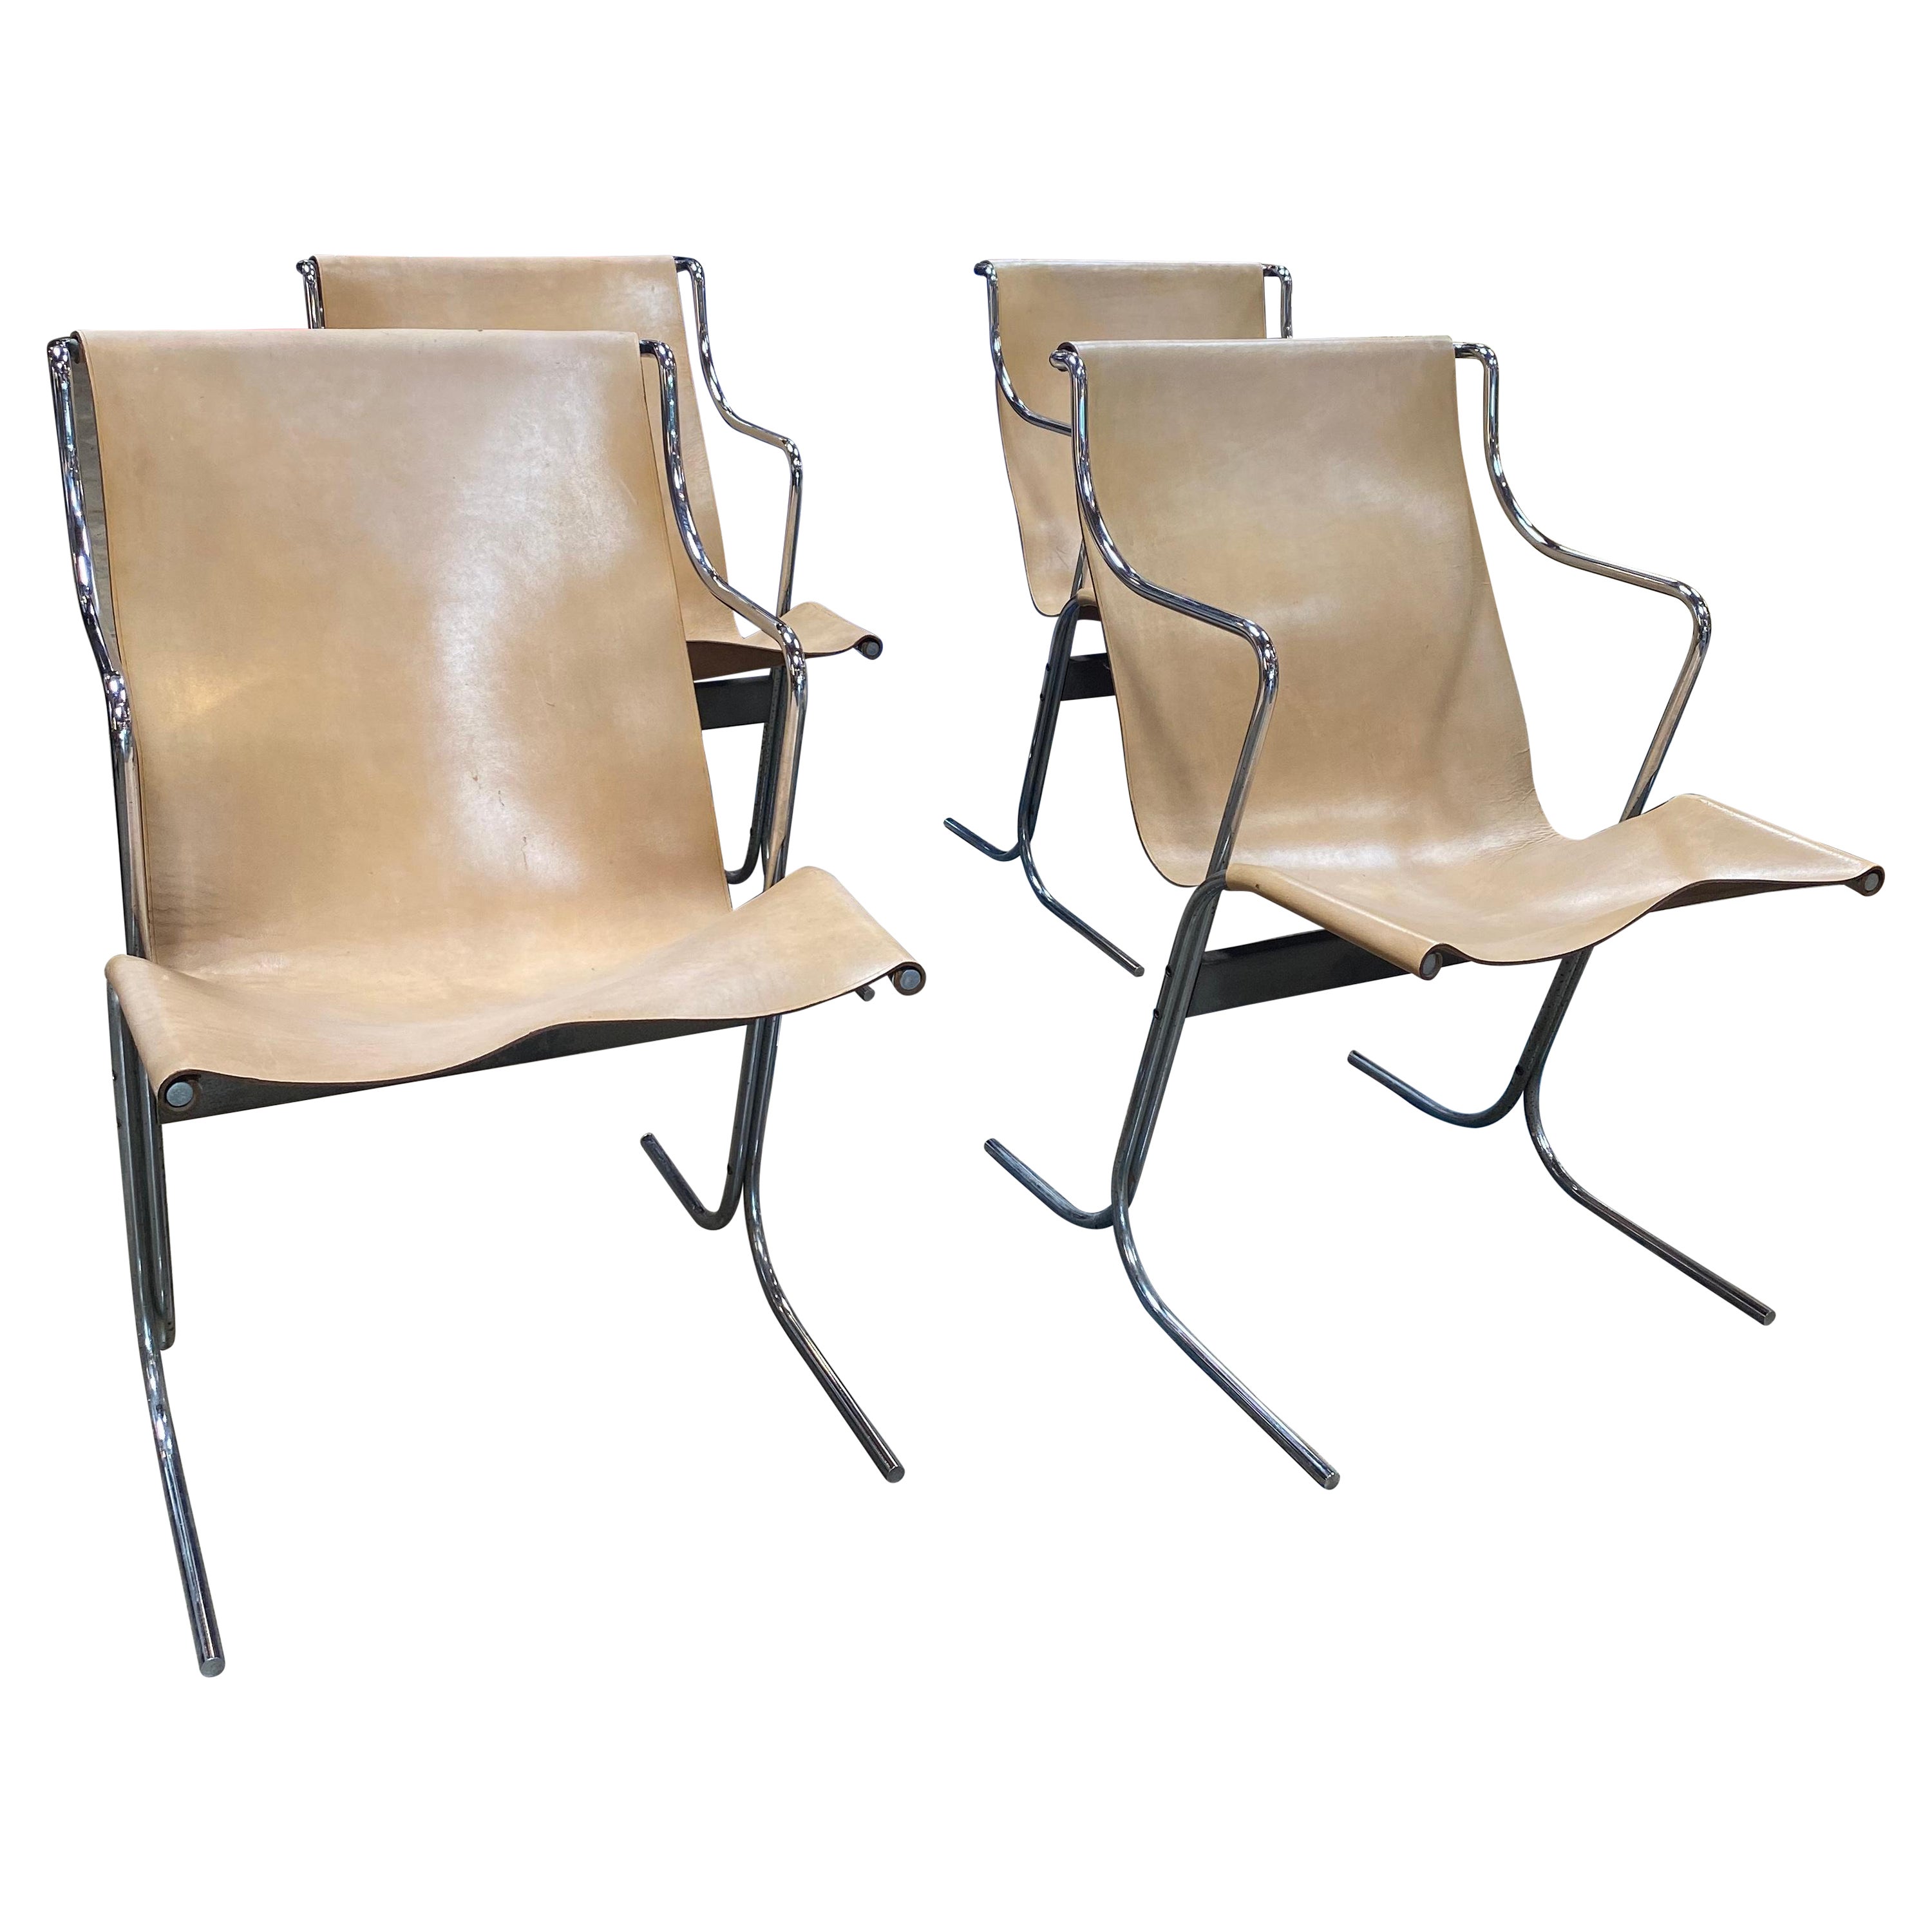 Italian Midcentury Set of 4 Lounge Chairs by Ross Littell for ICF Milan, 1960s